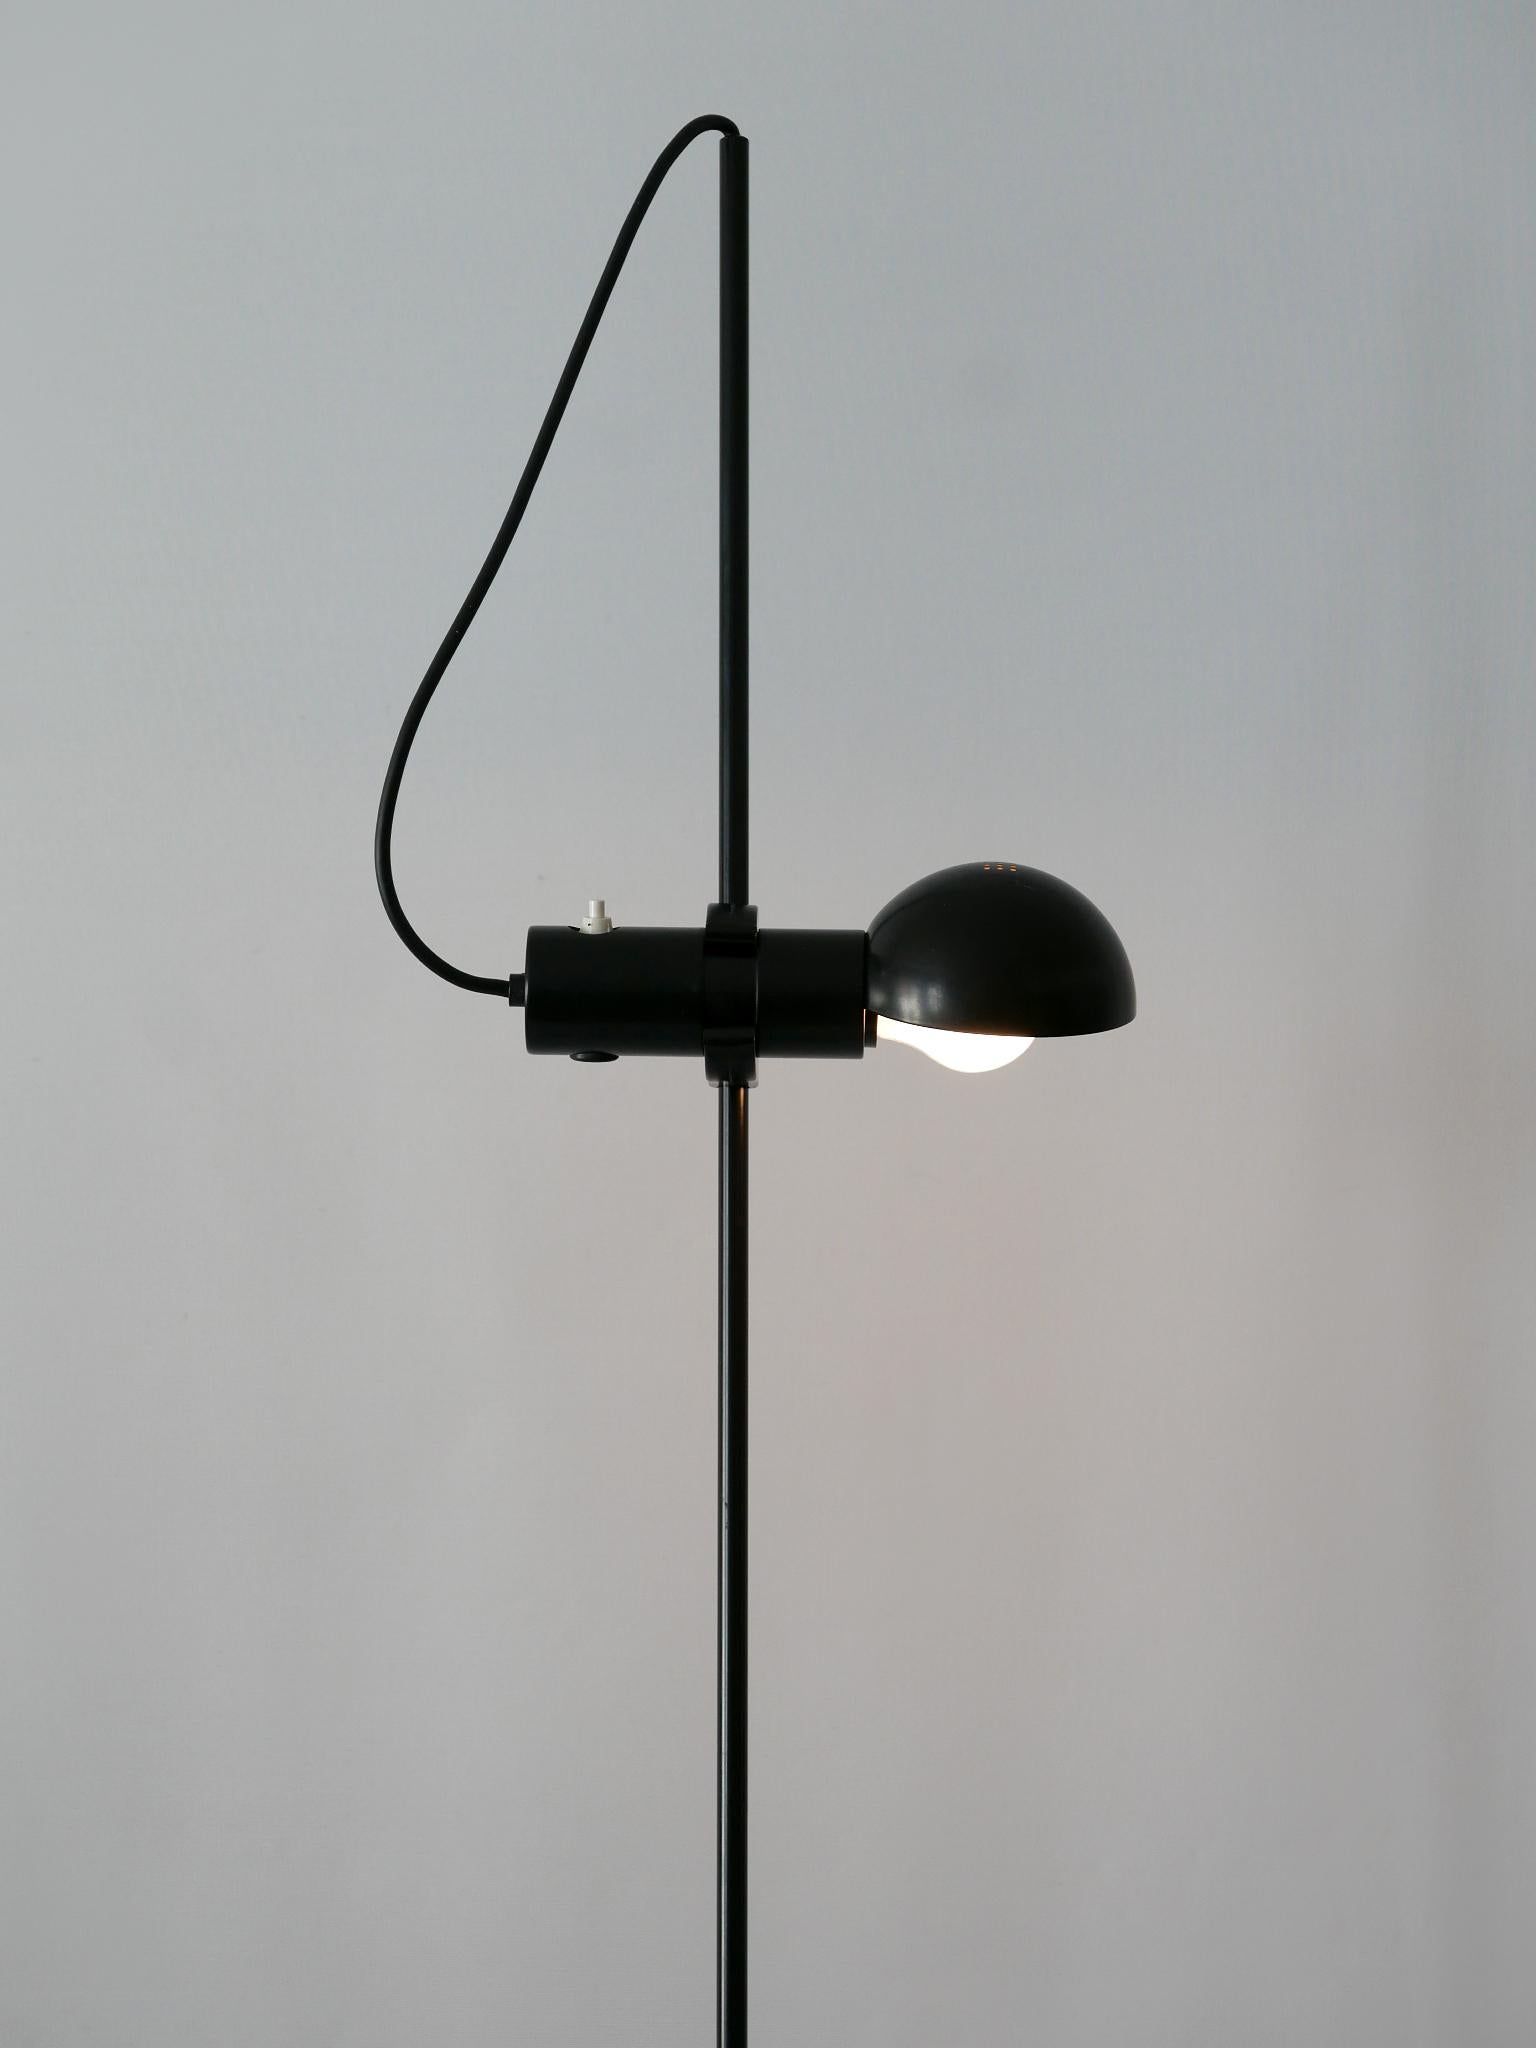 Rare Floor Lamp or Reading Light by Barbieri e Marianelli for Tronconi 1970s For Sale 7